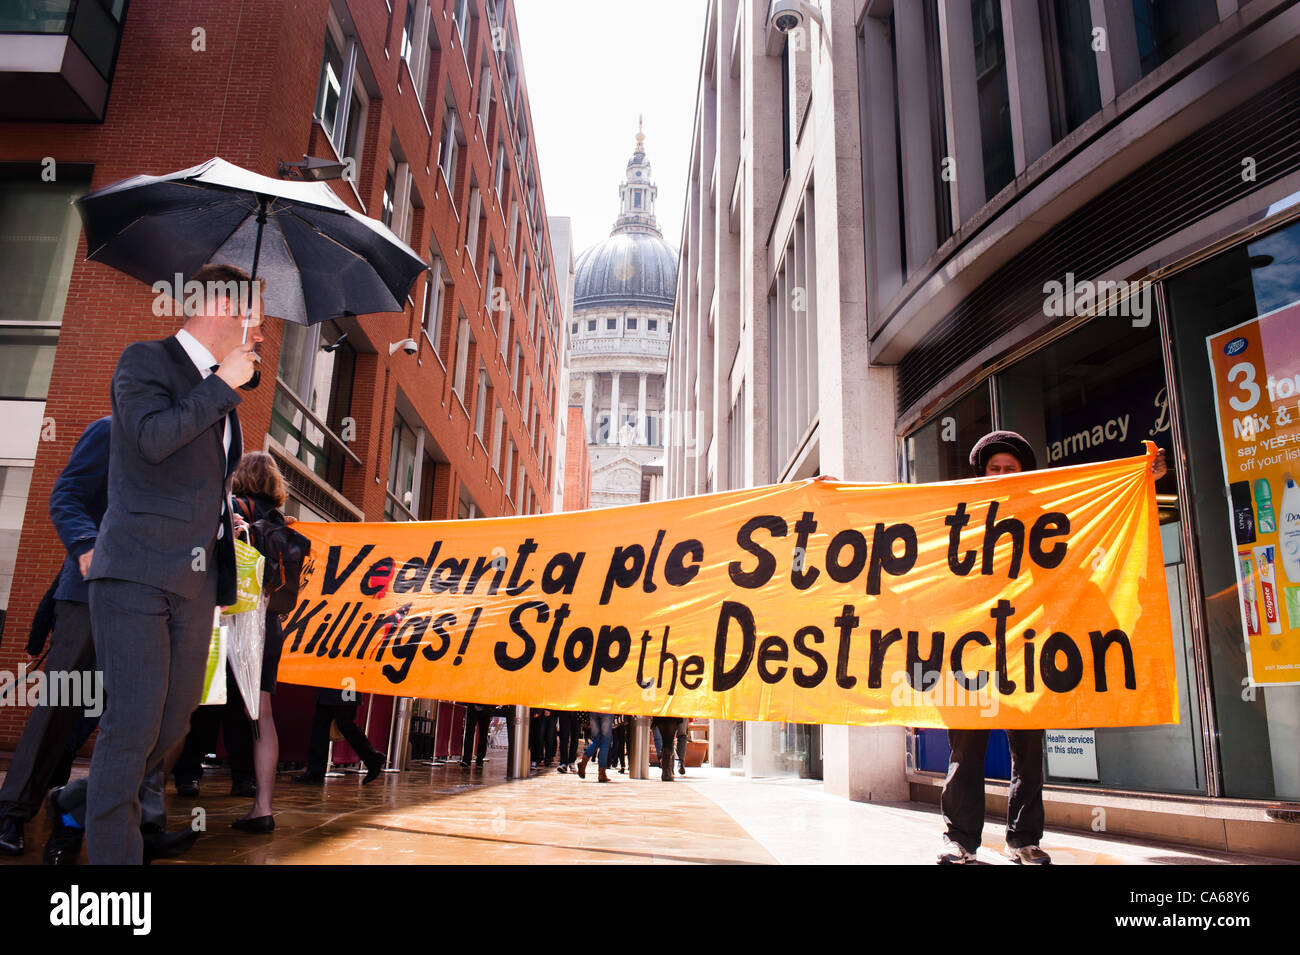 London, UK - 15 June 2012: protesters holding a banner reading ' Vedanta plc stop the killings! Stop the destruction' during the Carnival of Dirt. St. Paul's cathedral in the background. More than 30 activist groups have gathered to highlight the alleged illicit deeds of mining companies. Stock Photo